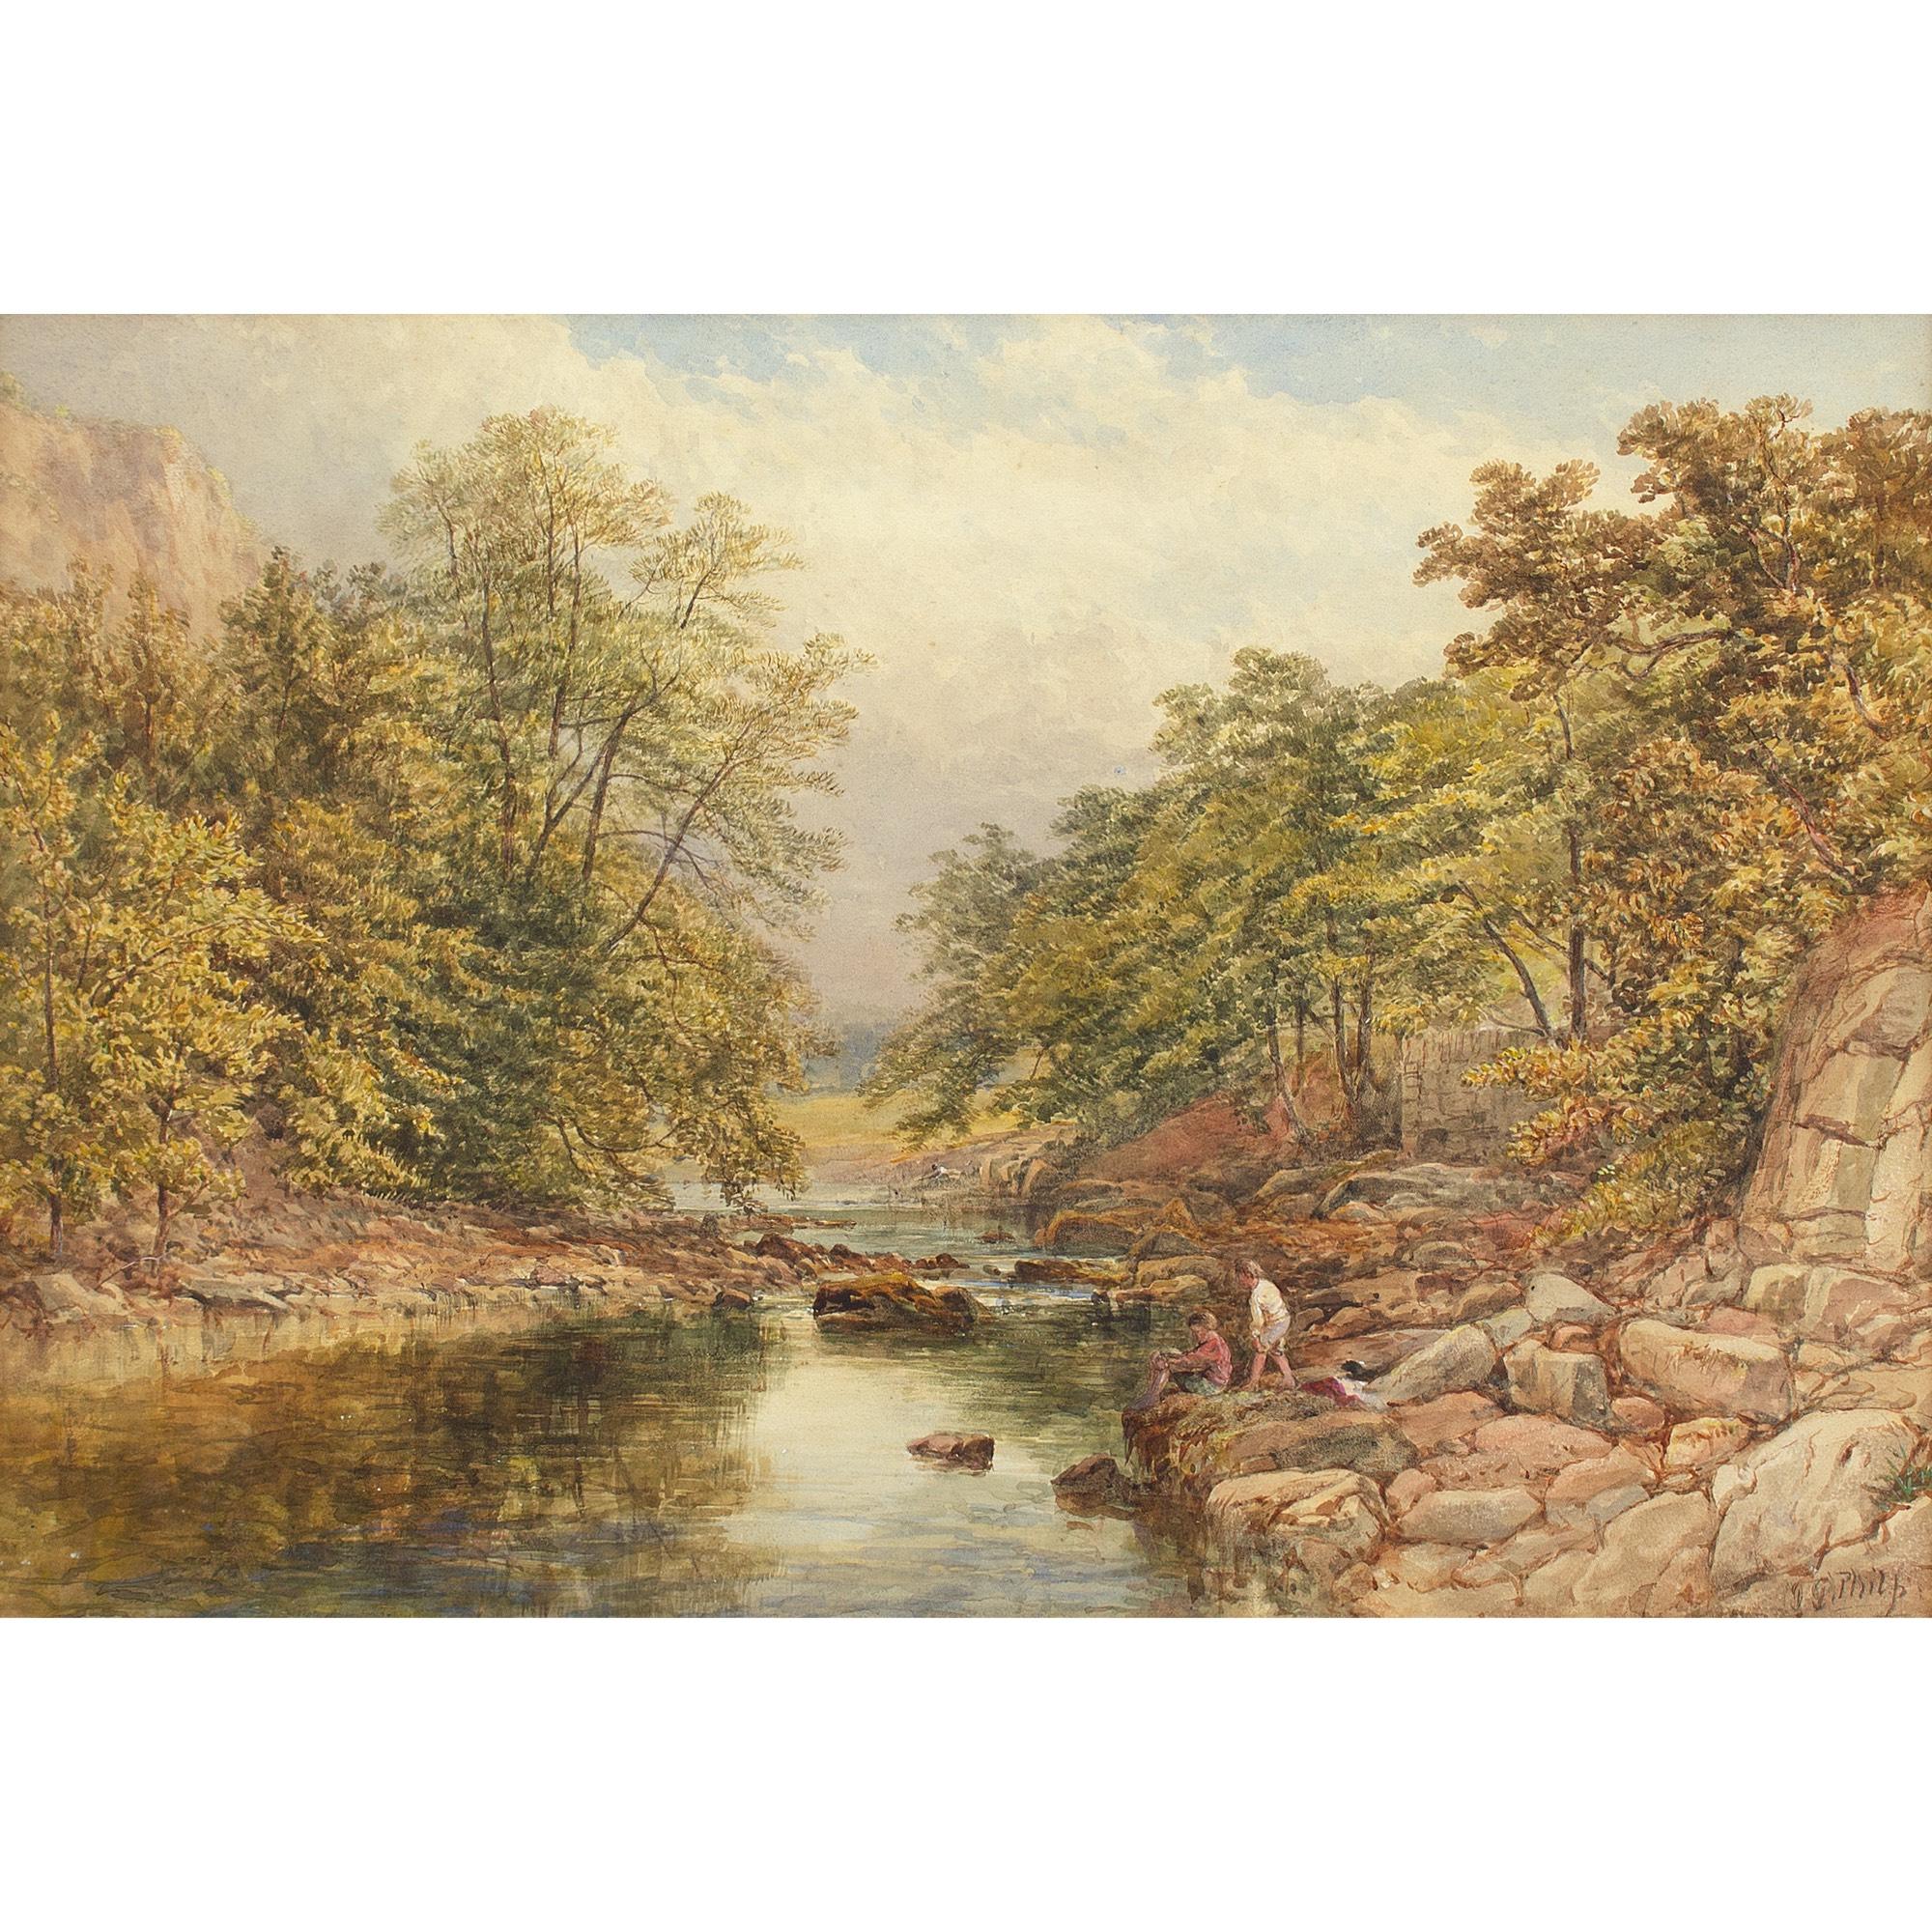 This 19th-century watercolour by British artist James George Philp (1816-1885) depicts a tranquil view on the River Derwent in Derbyshire.

Meandering between craggy tree-lined banks, the enchanting Derwent shimmers amid Summertime bliss. A bright